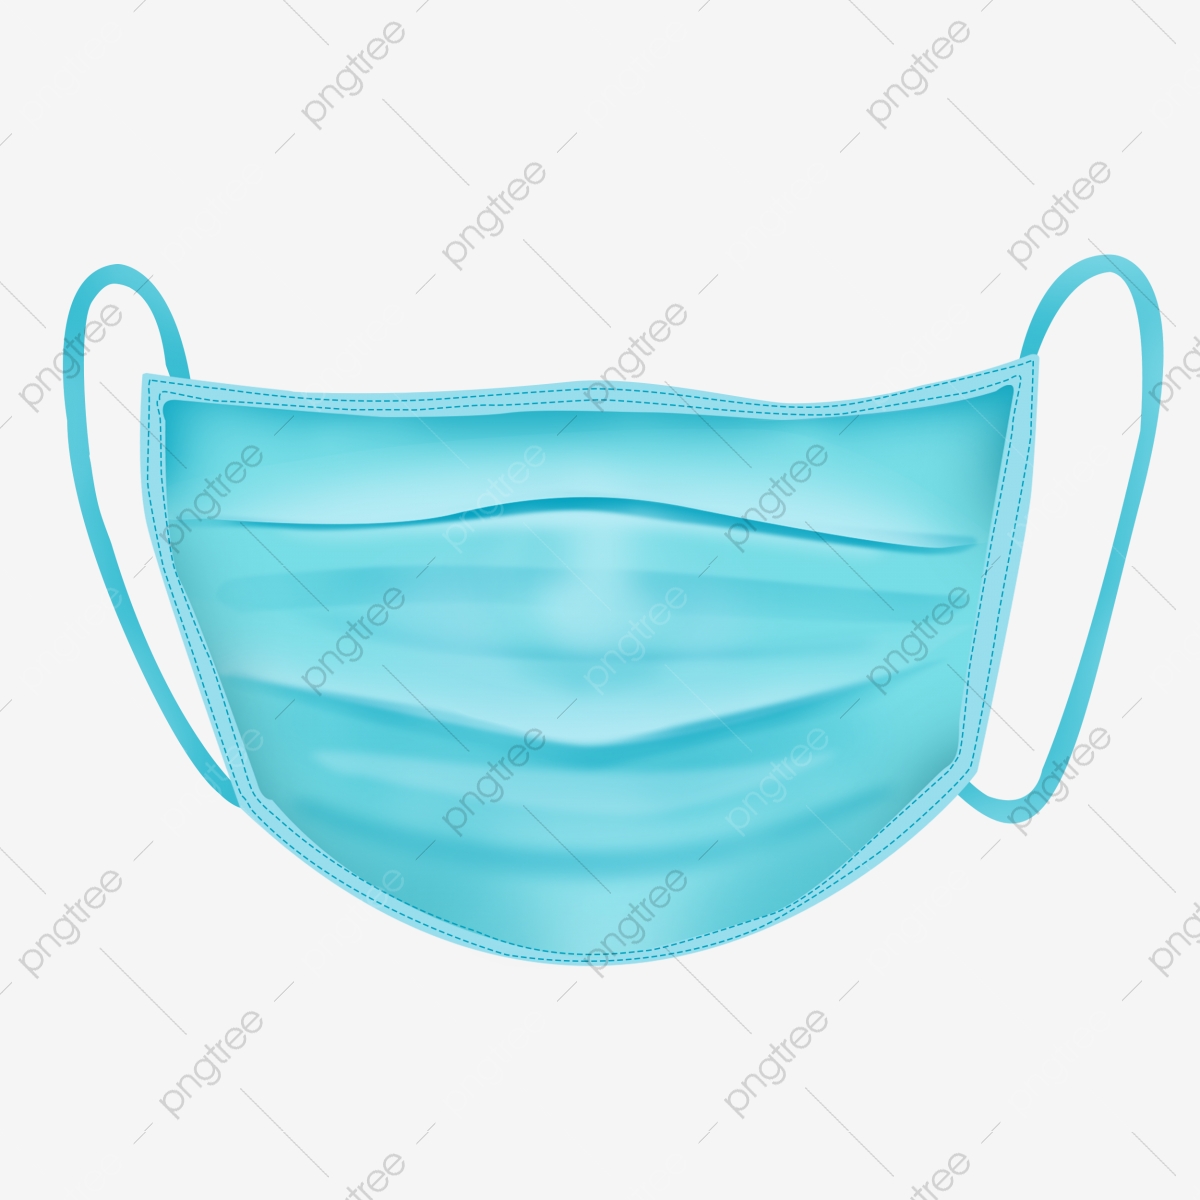 Face Mask PNG - 178296